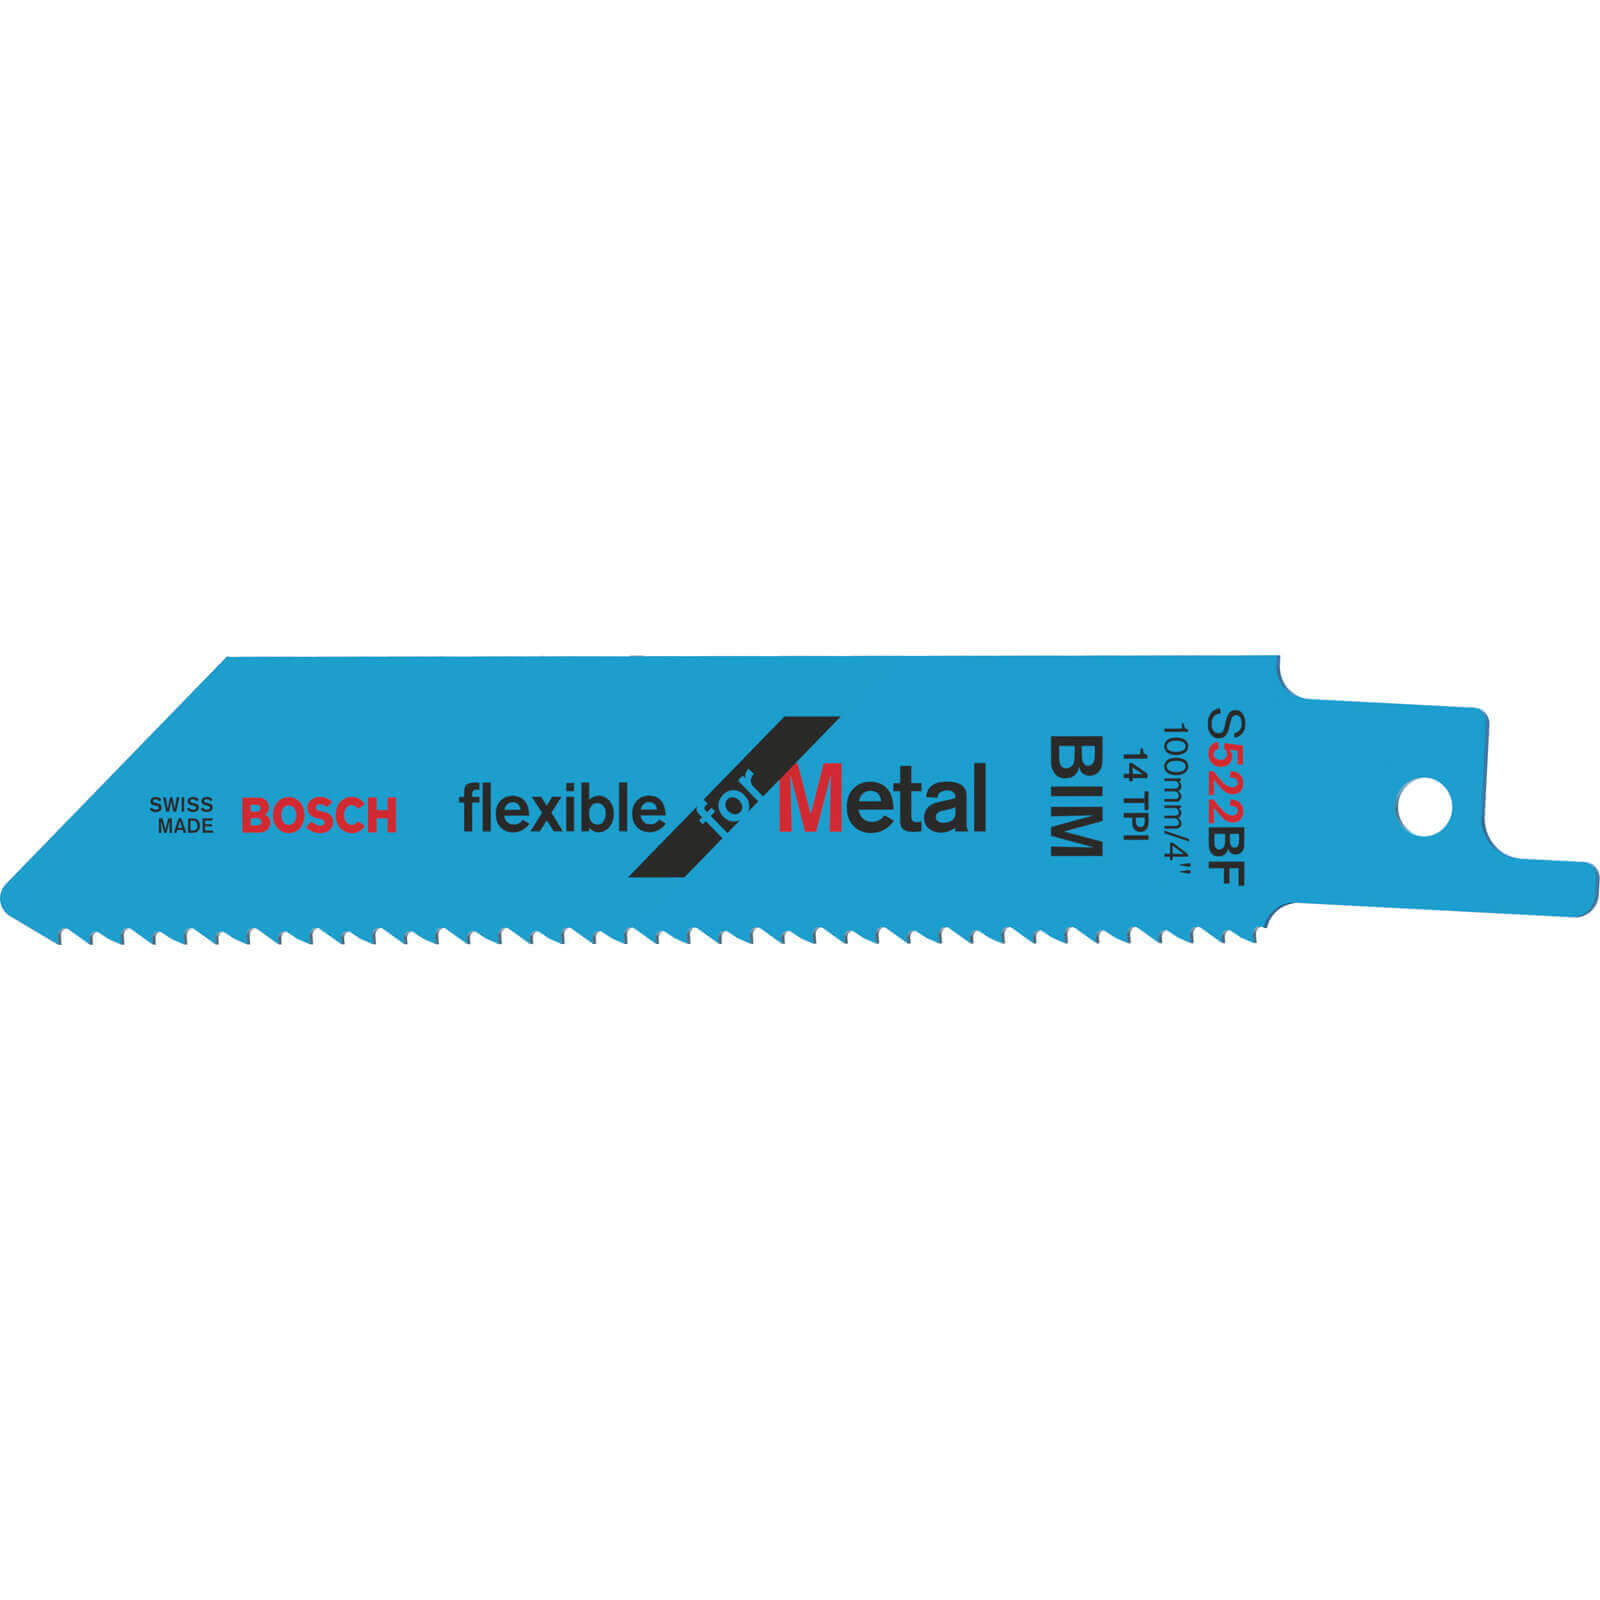 Photo of Bosch S522bf Metal Reciprocating Saw Blades Pack Of 5